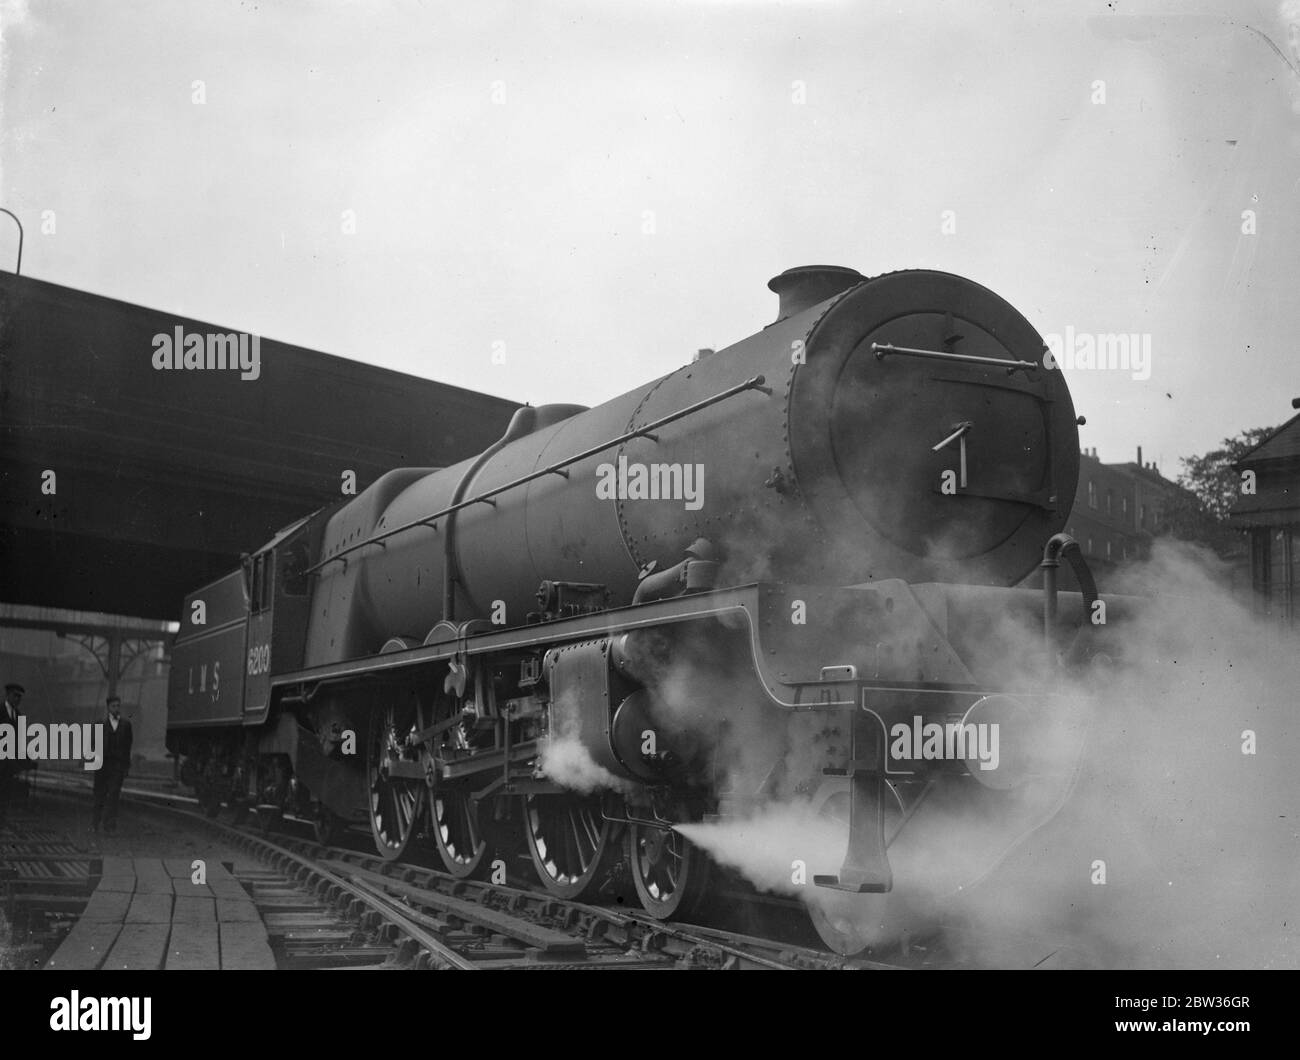 Britains most powerful passenger locomotive at Euston . The first of three giant new locomotives which constitute the most powerful express passenger type in Great Britain made its first appearance at Euston Station , London . The engine has been designed for duty on the heaviest Anglo Scottish expresses of the LMS . Photo shows , the new locomotive entering Euston Station , London . 28 June 1933 Stock Photo